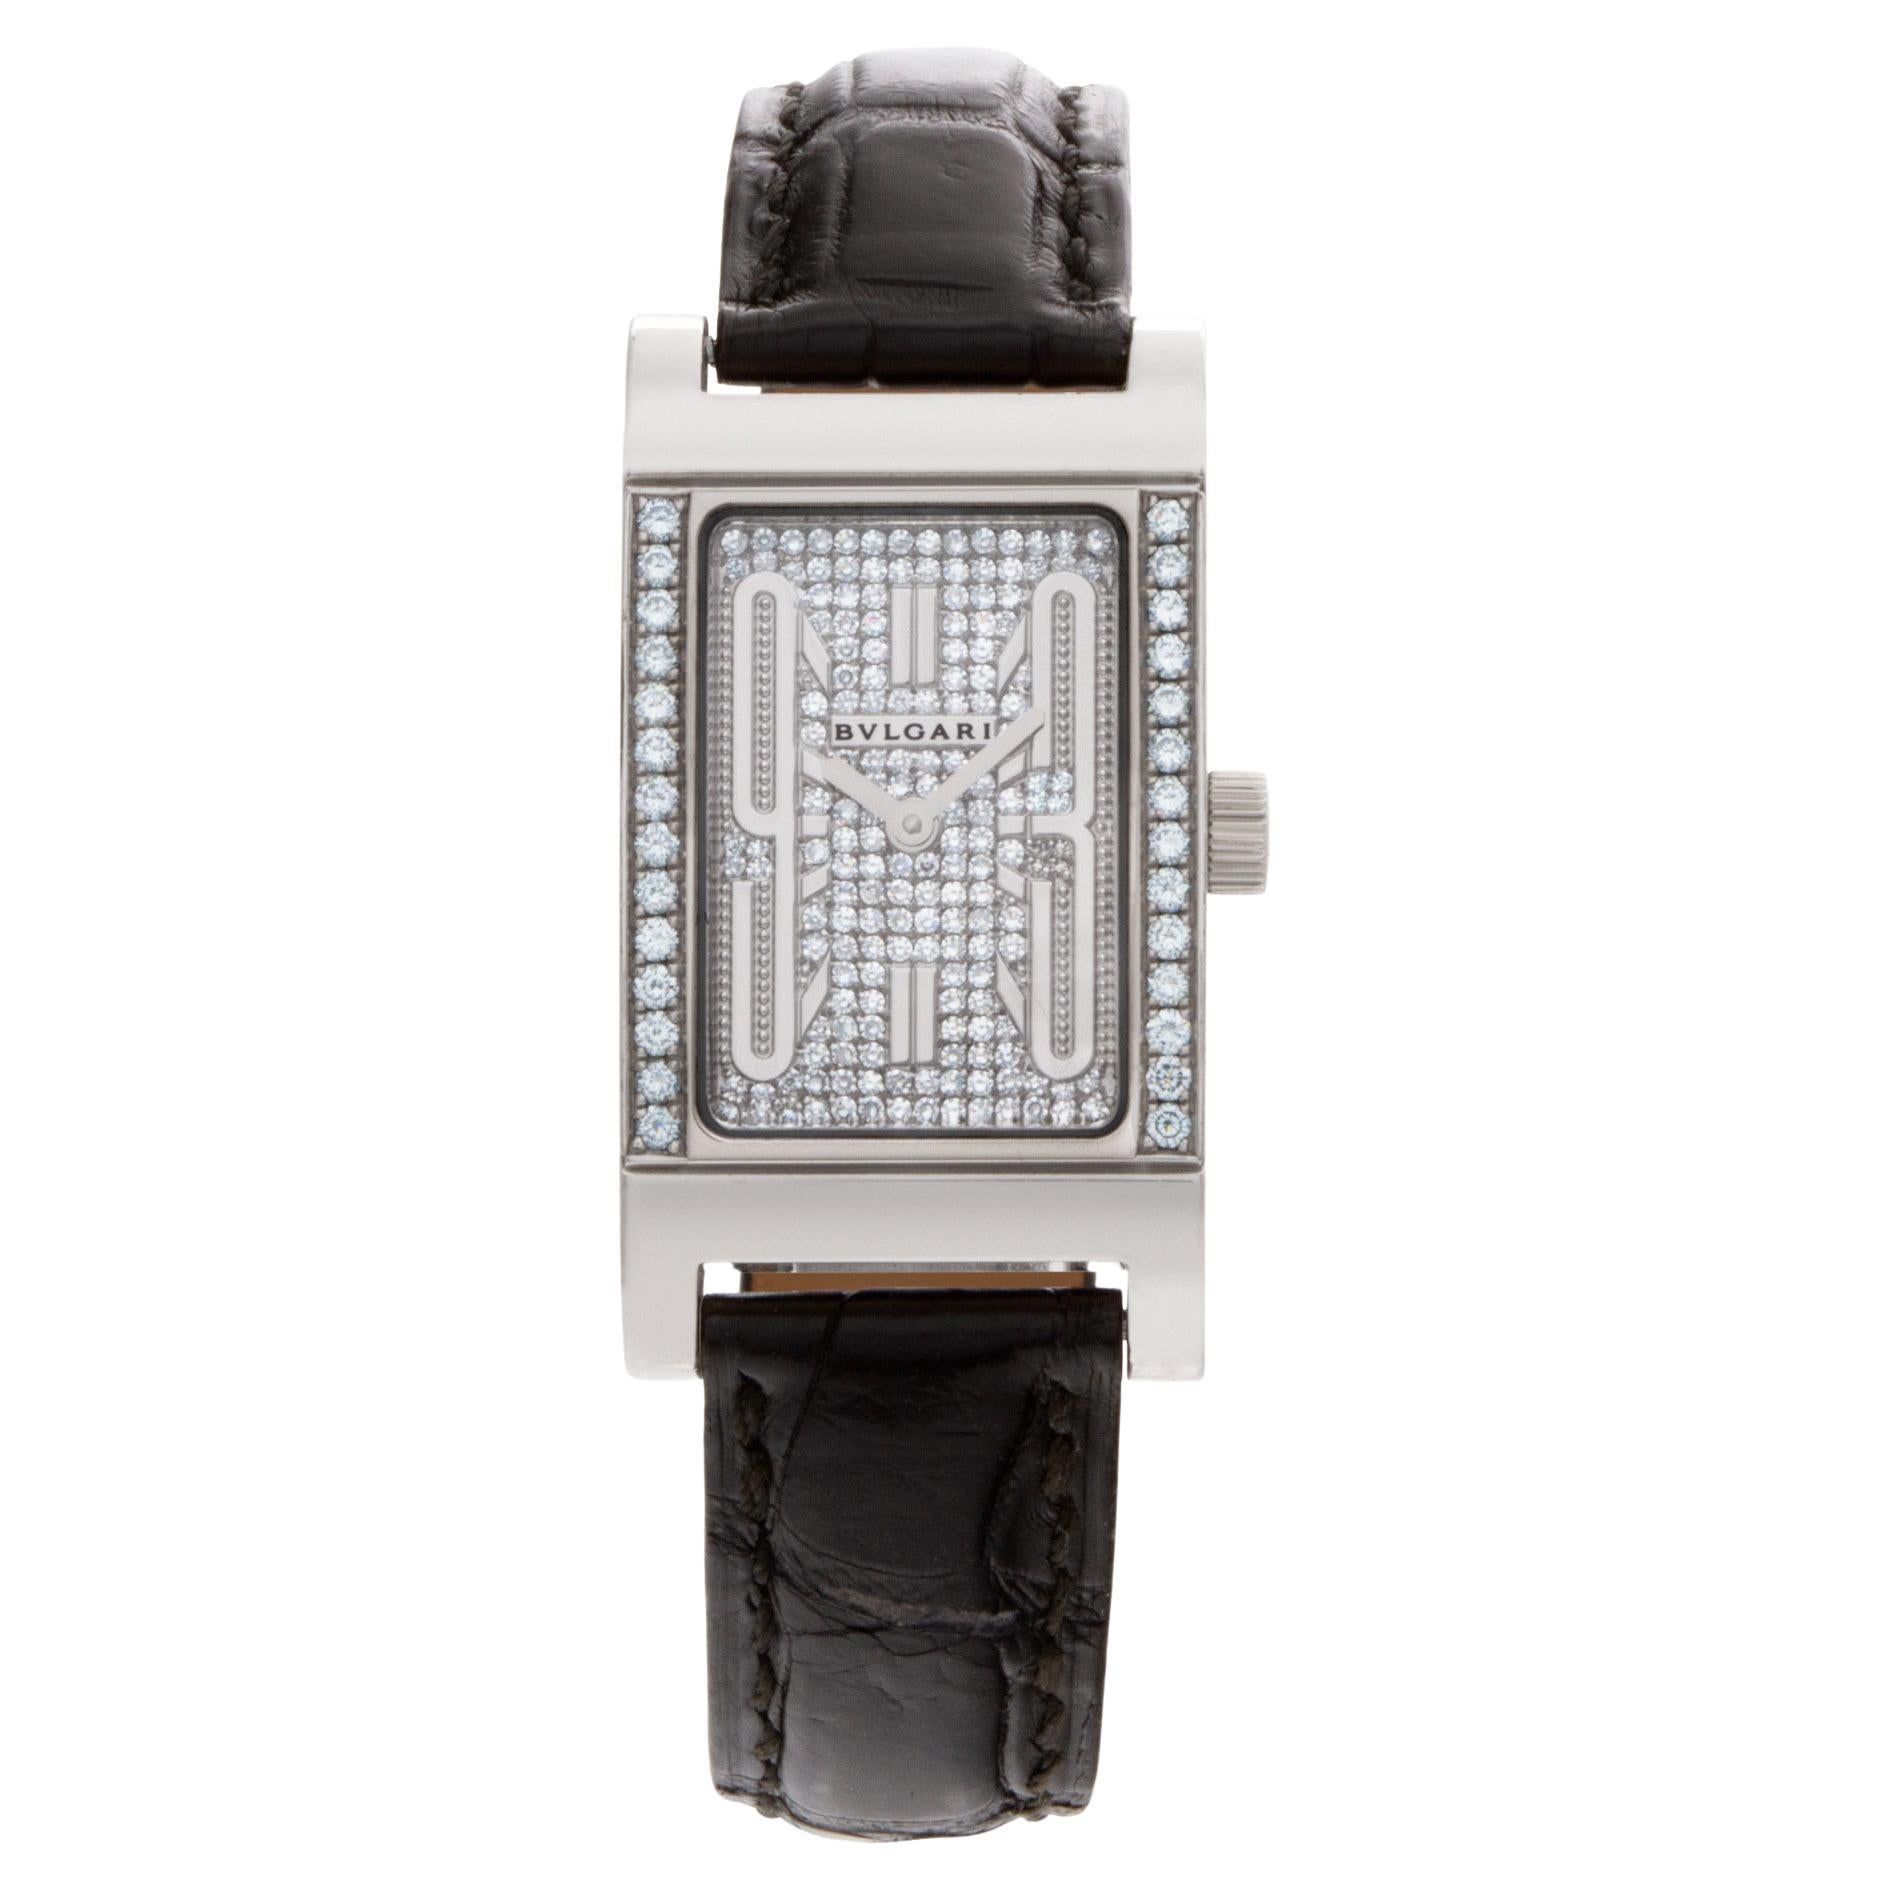 Bvlgari Rettangolo Watch in 18k White Gold with Pave Diamond Dial, Bezel For Sale